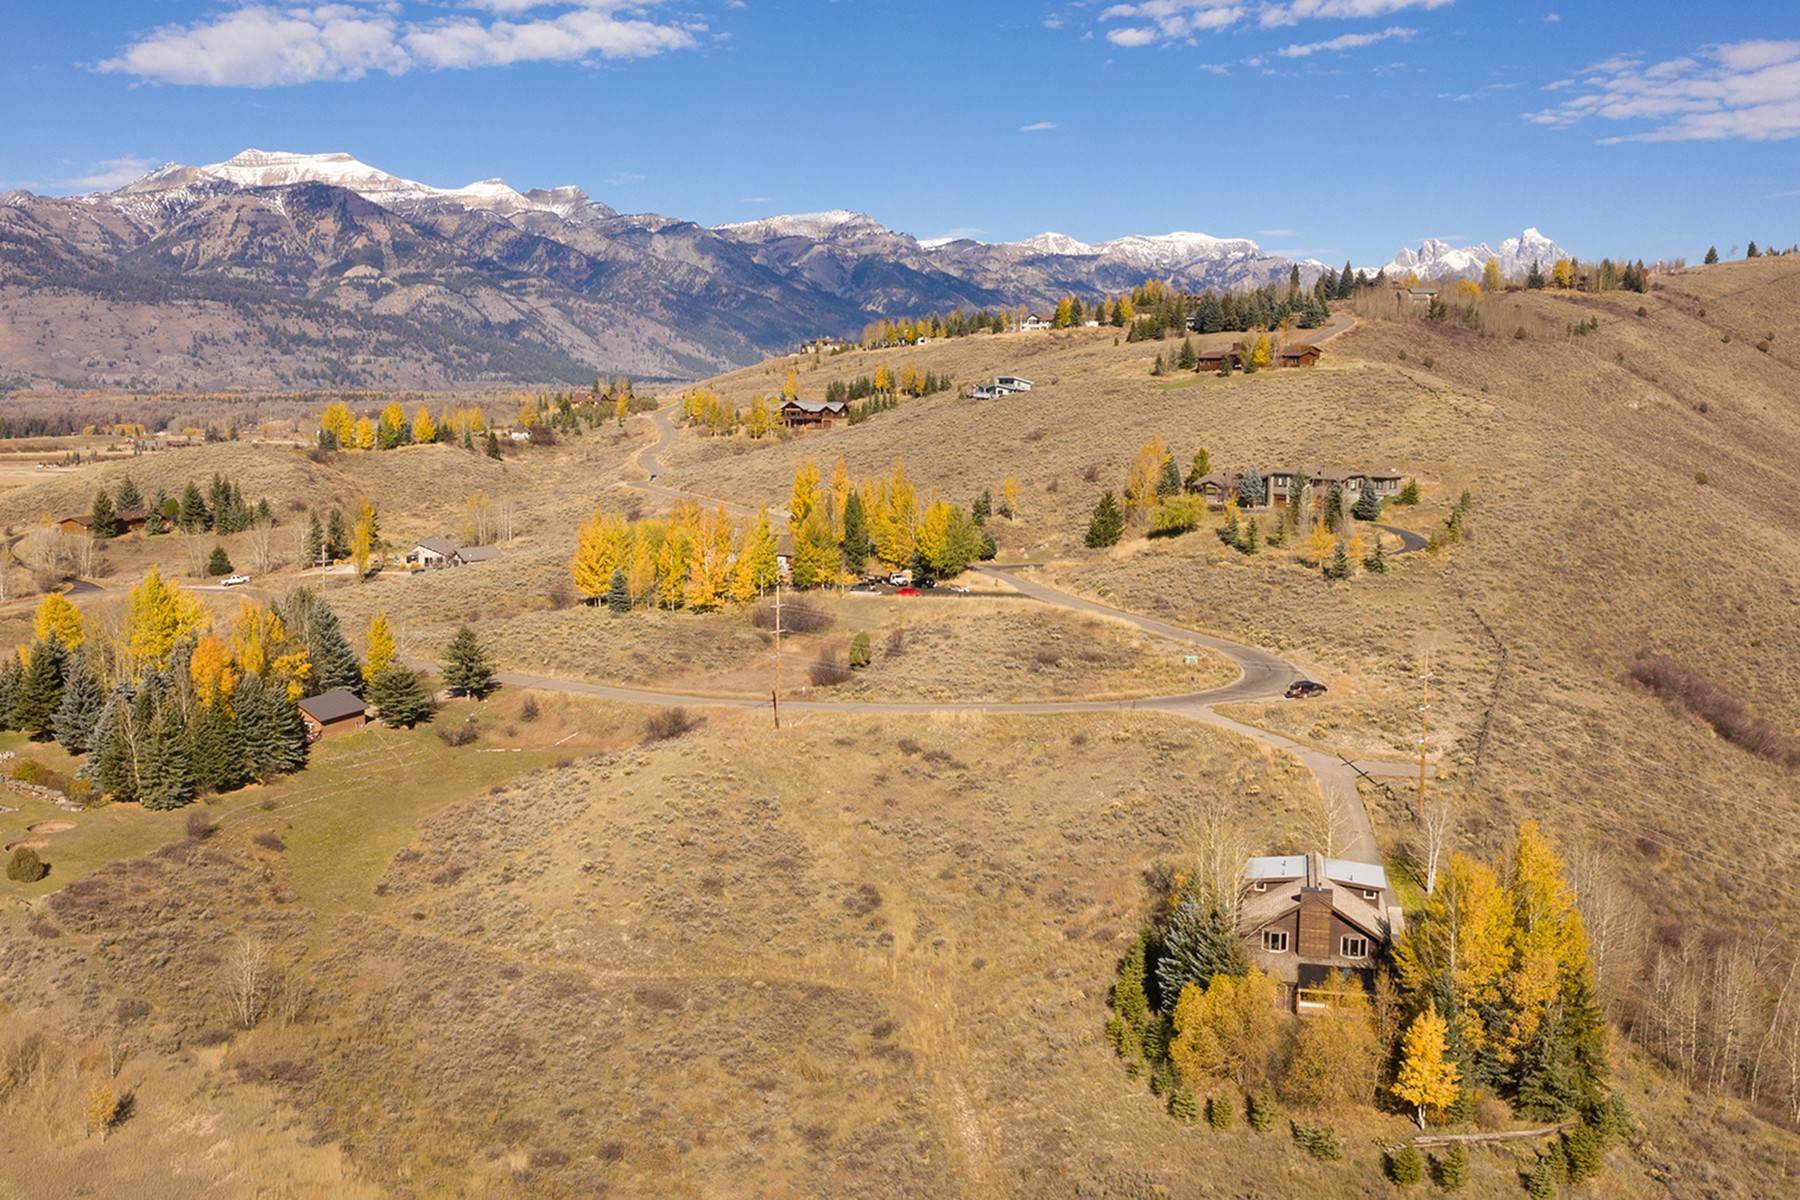 Single Family Homes for Sale at Modern Farmhouse Adjacent to Open Space 290 Bar Y Road Jackson, Wyoming 83001 United States